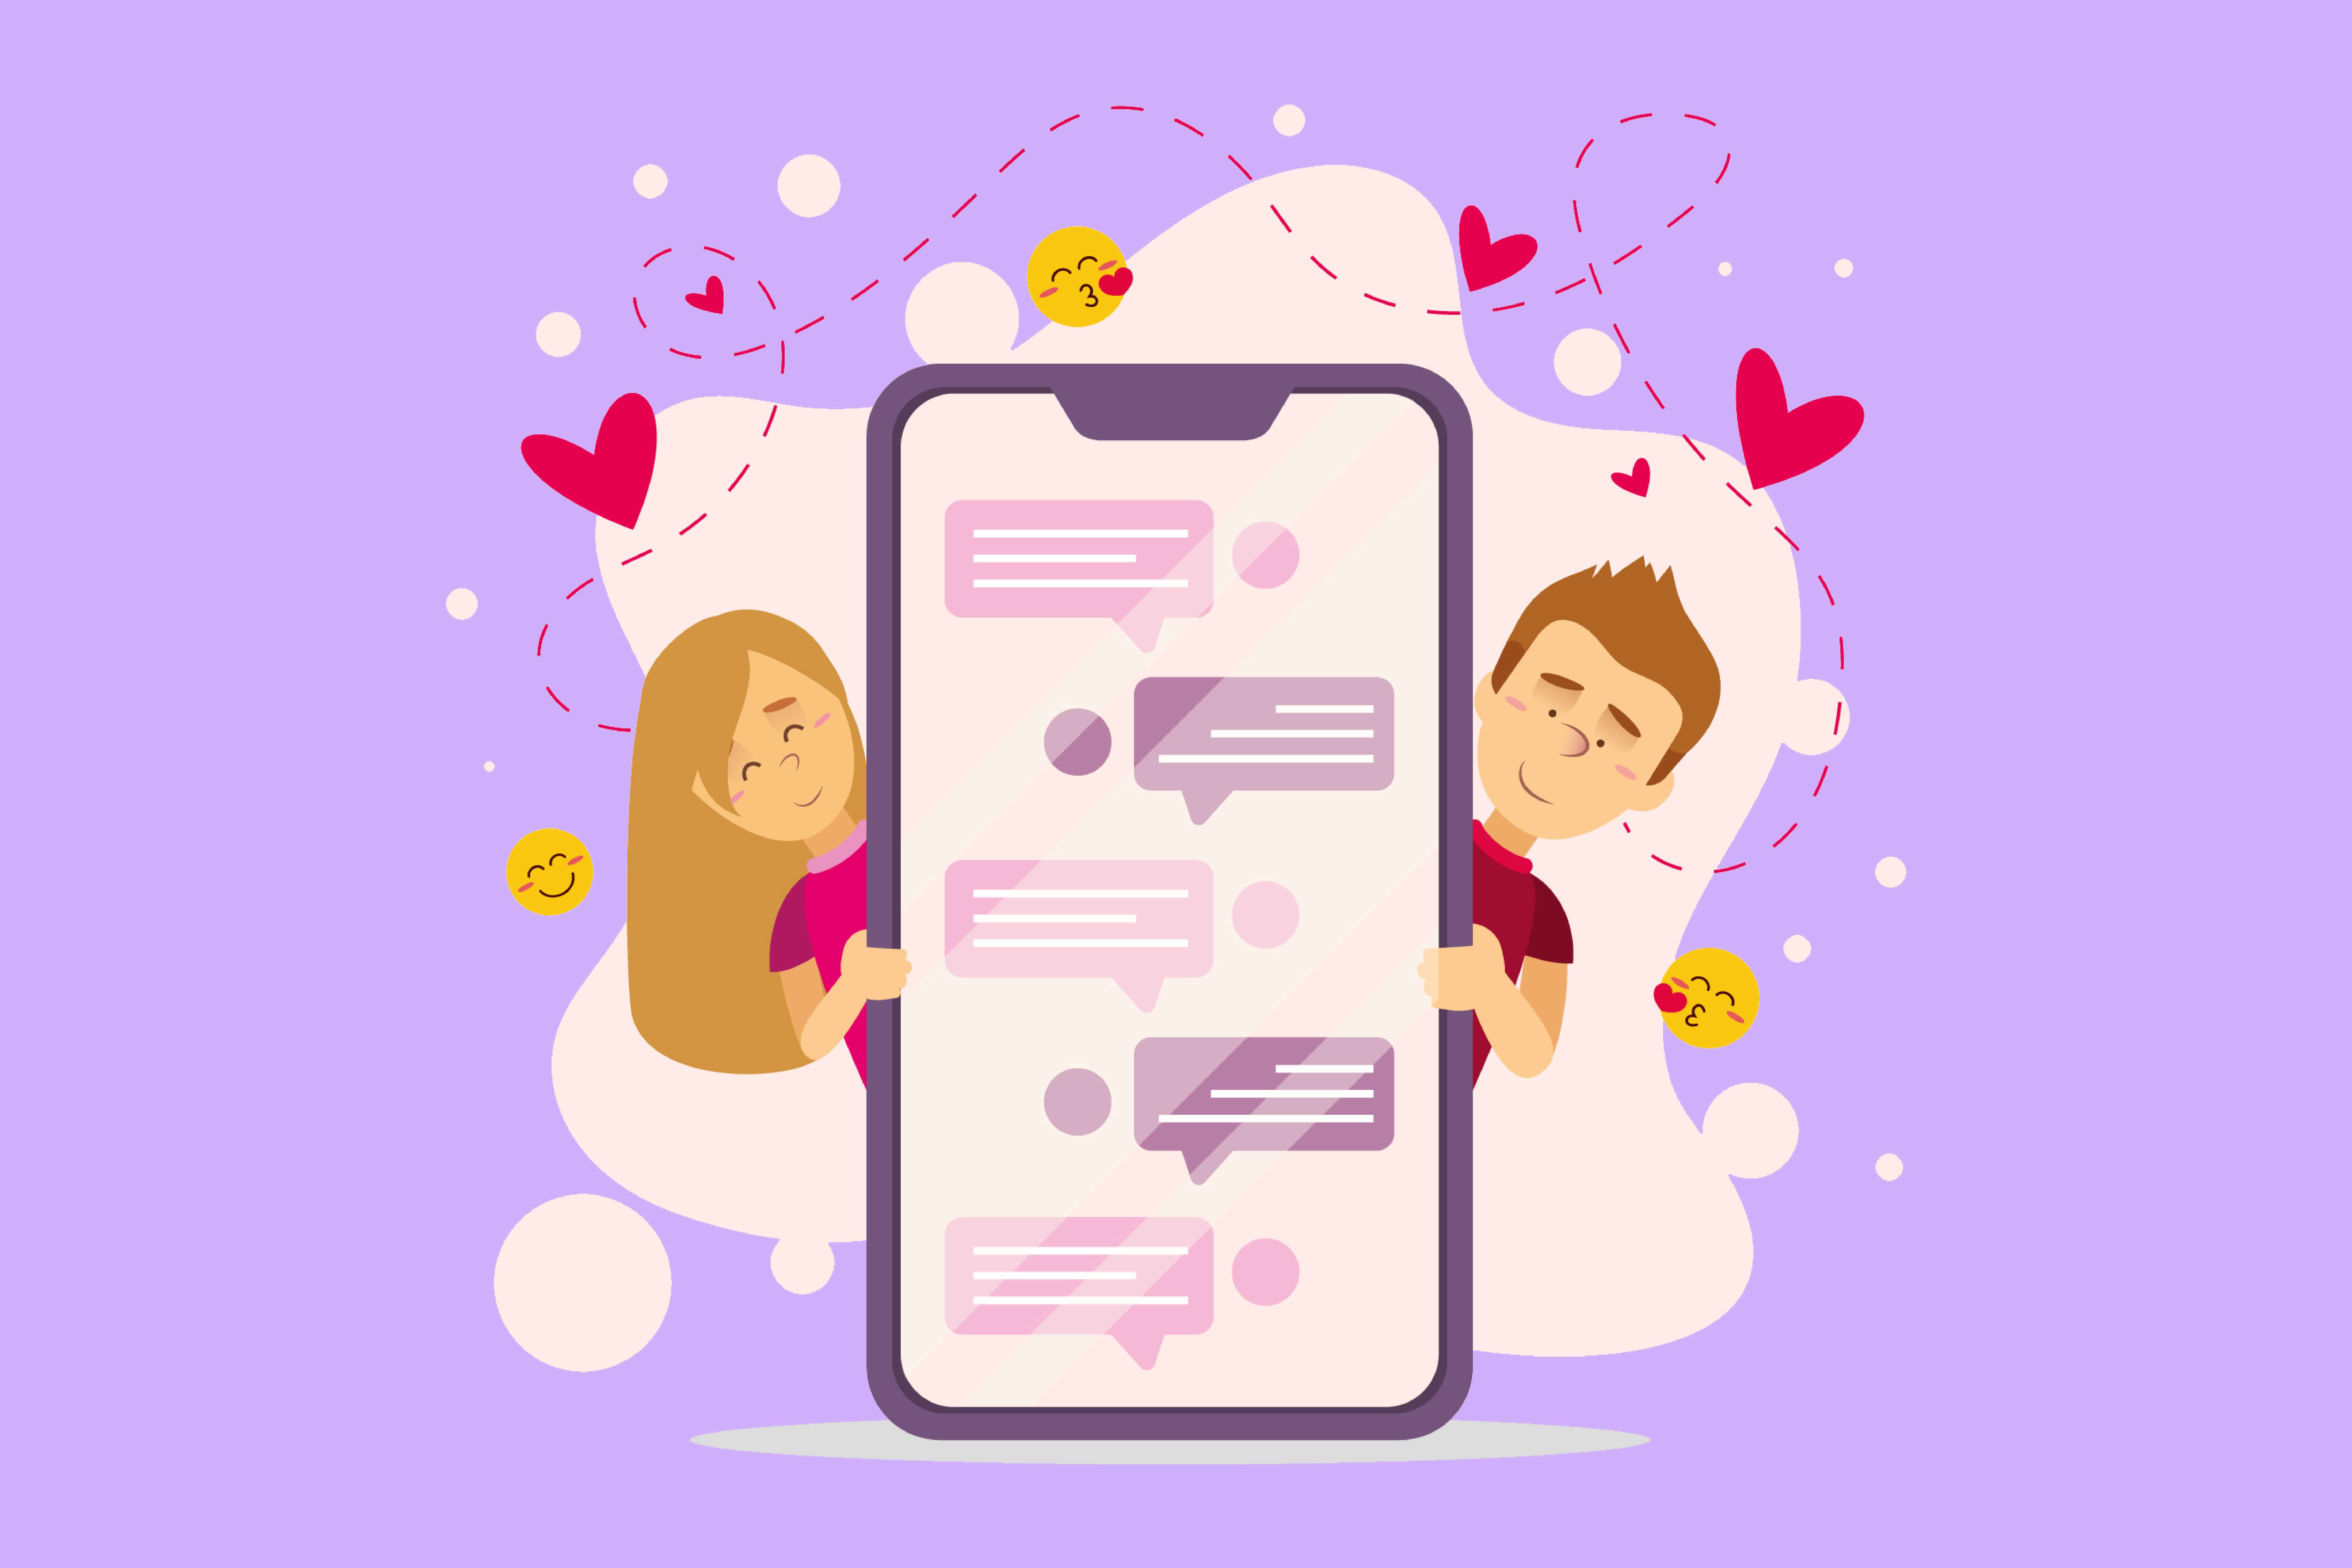 Online dating small talk